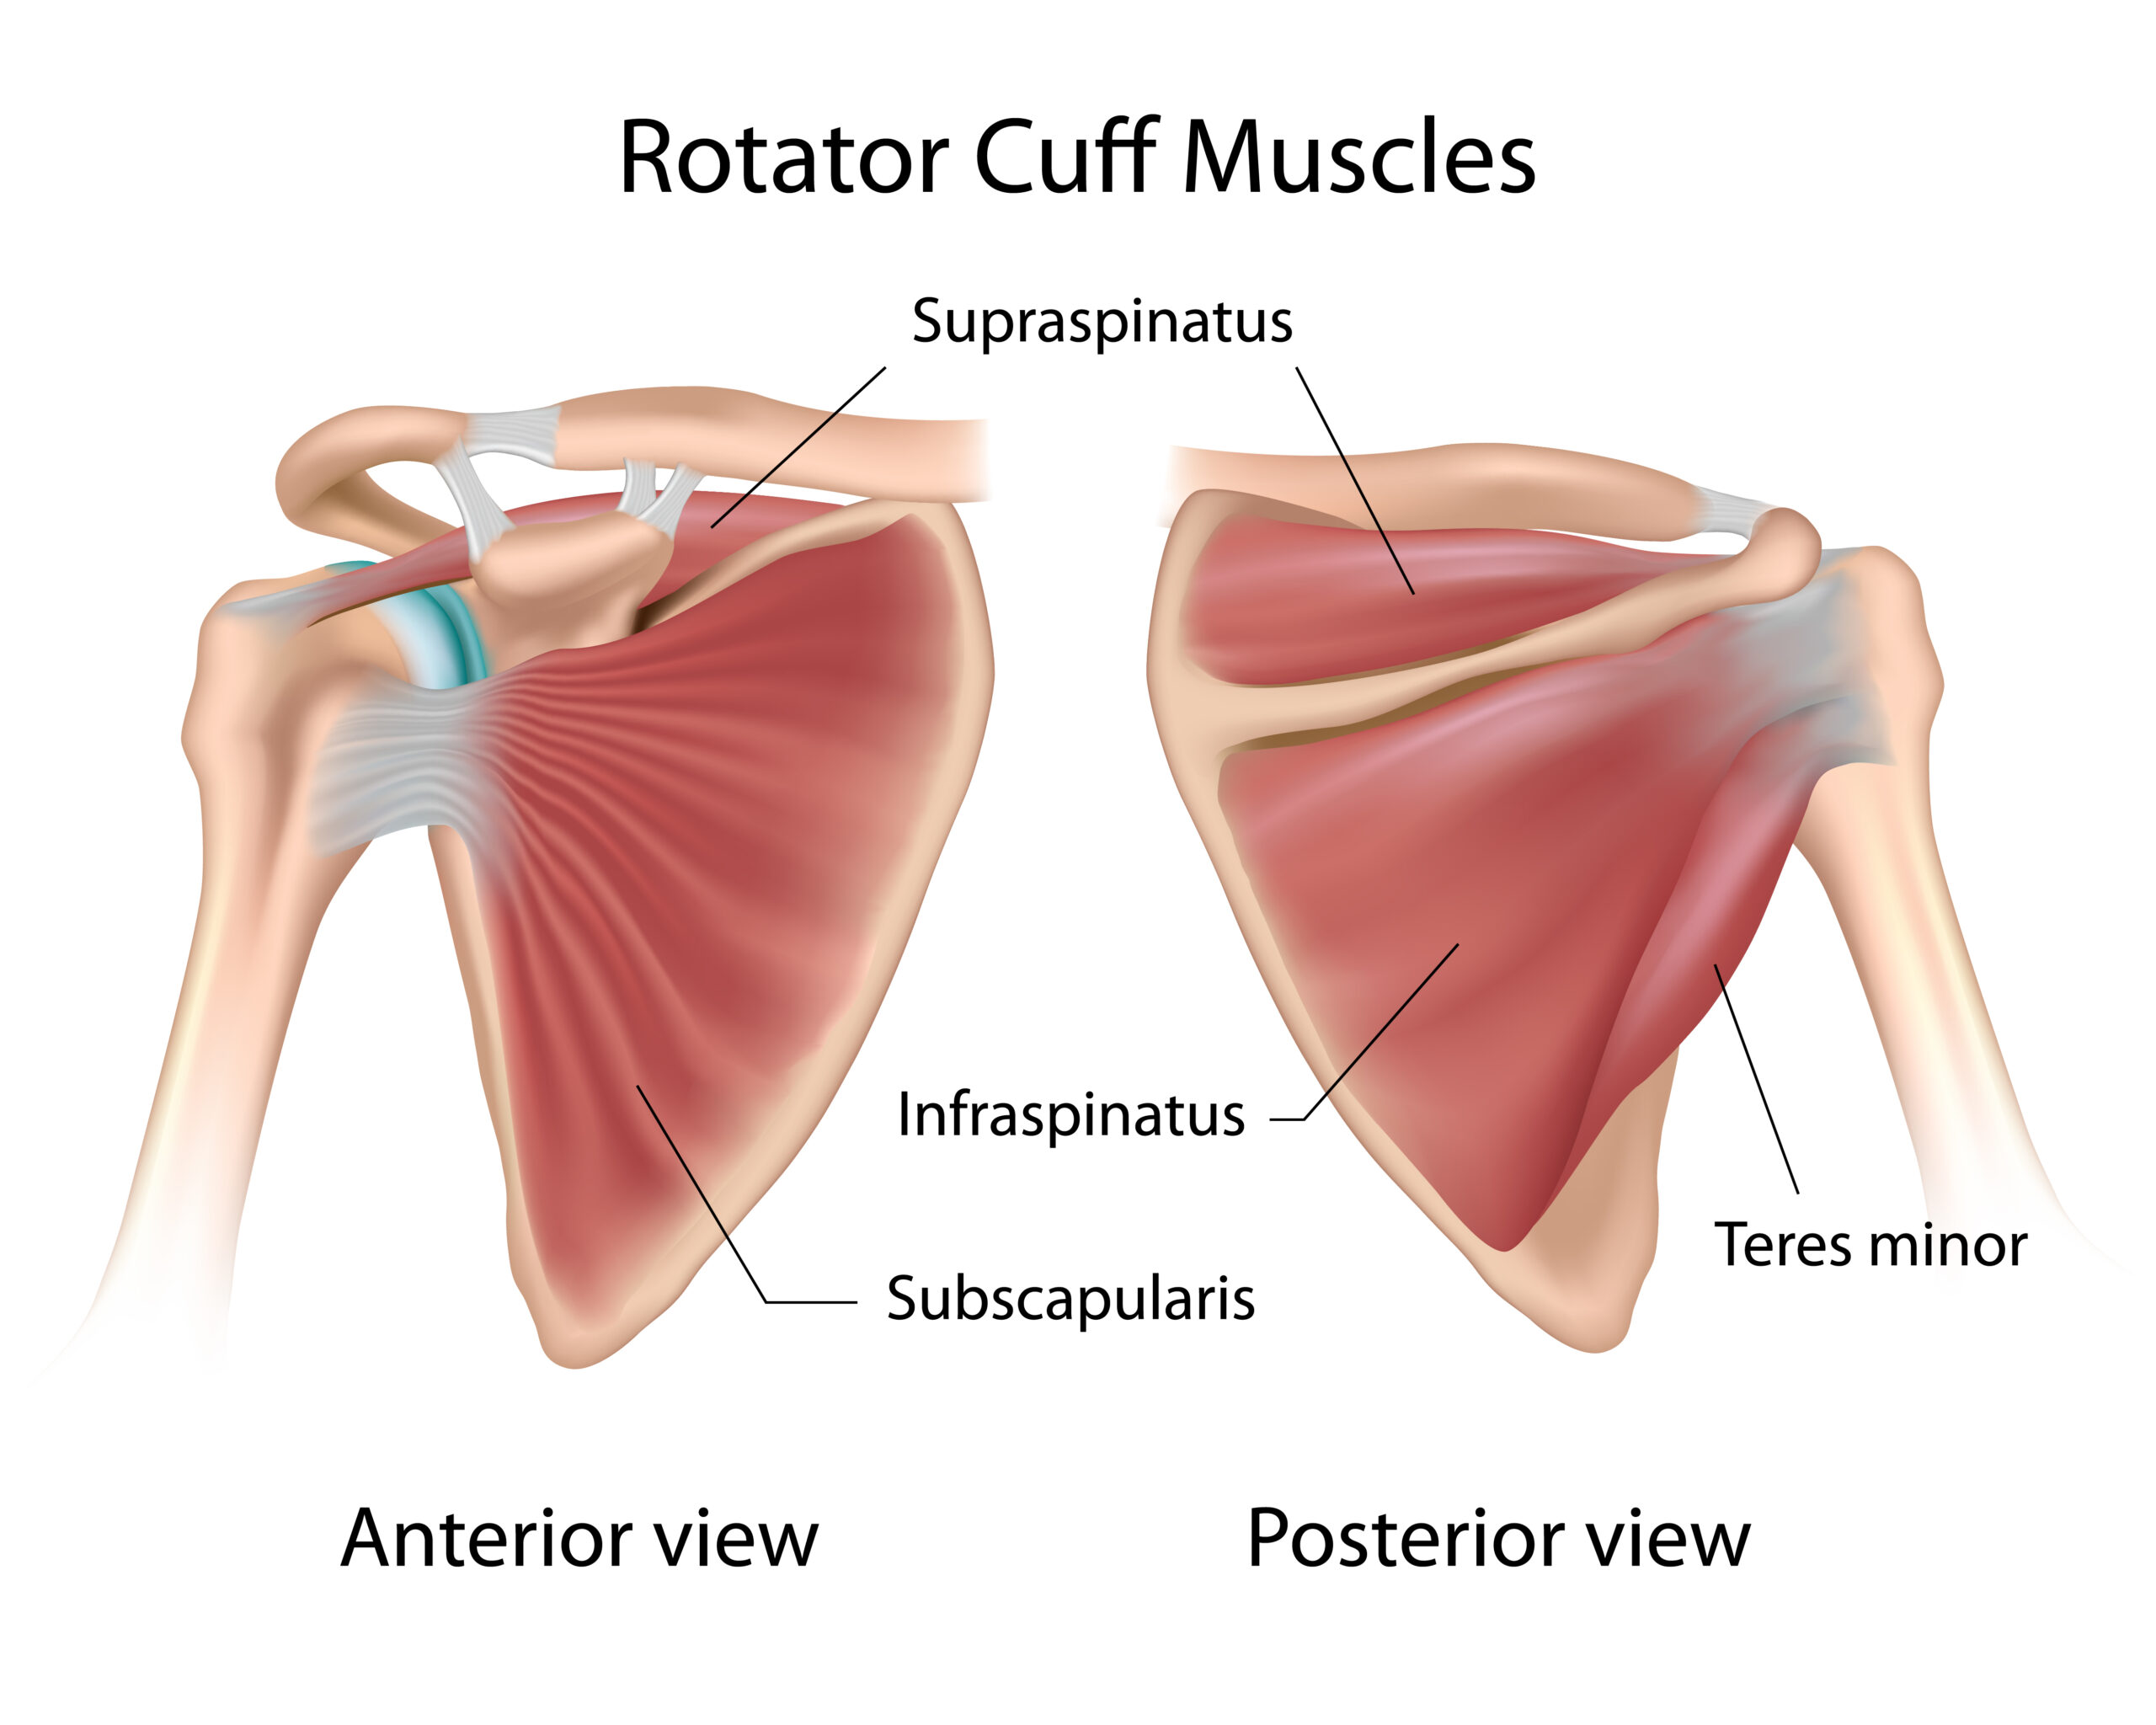 image of the rotator cuff muscles